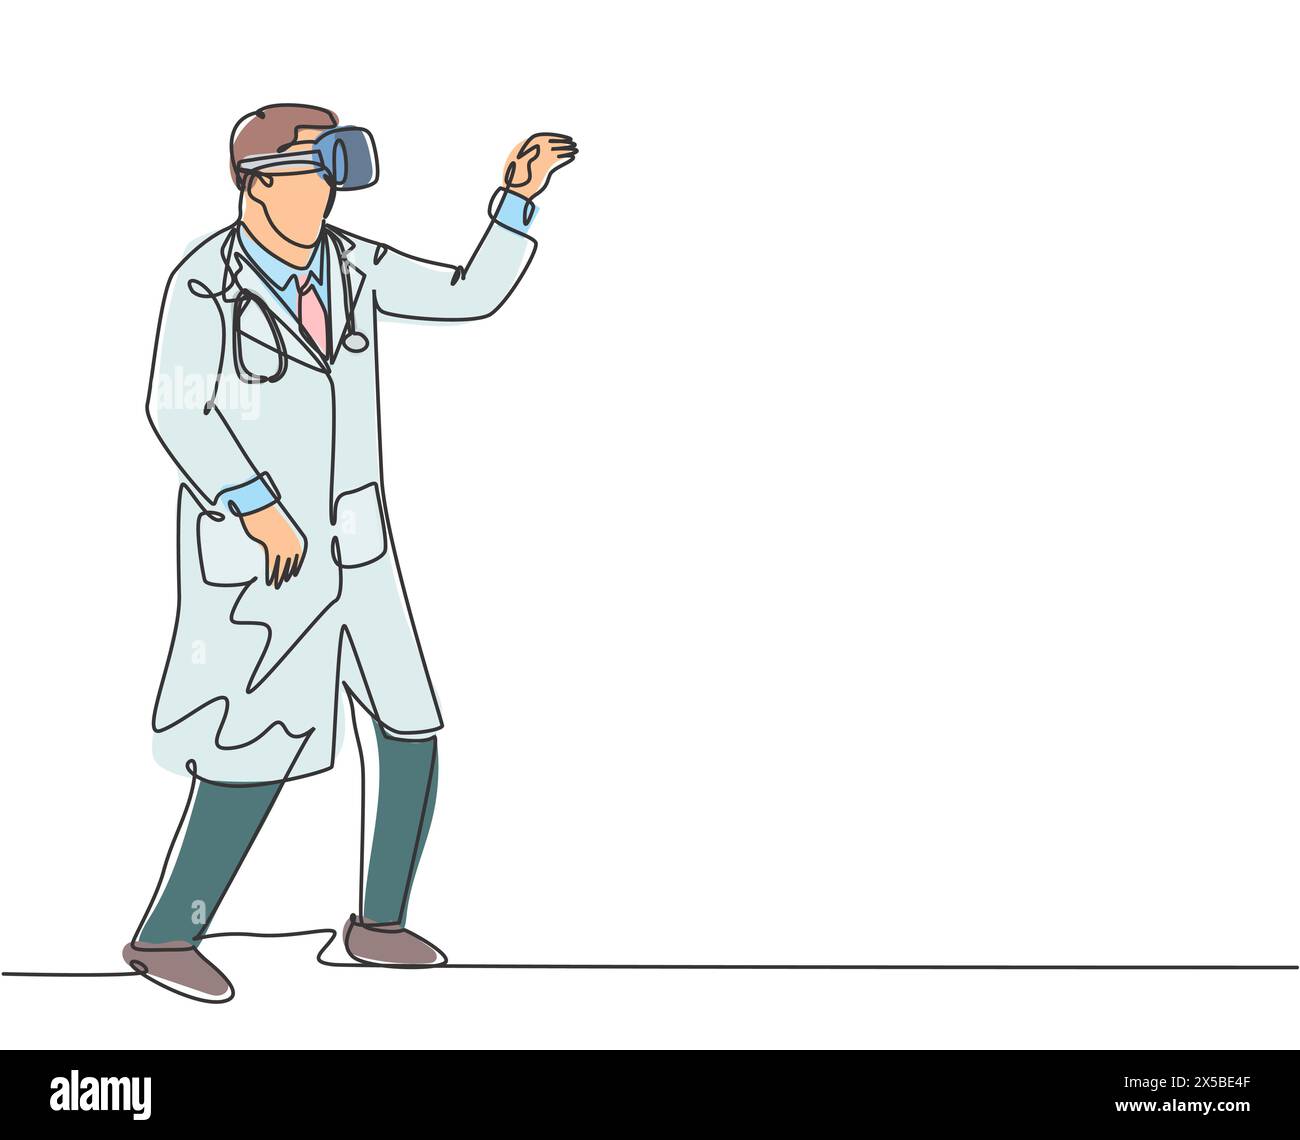 Single continuous line drawing of young happy male doctor ready to catch something while playing business simulation game. Virtual reality game player Stock Vector